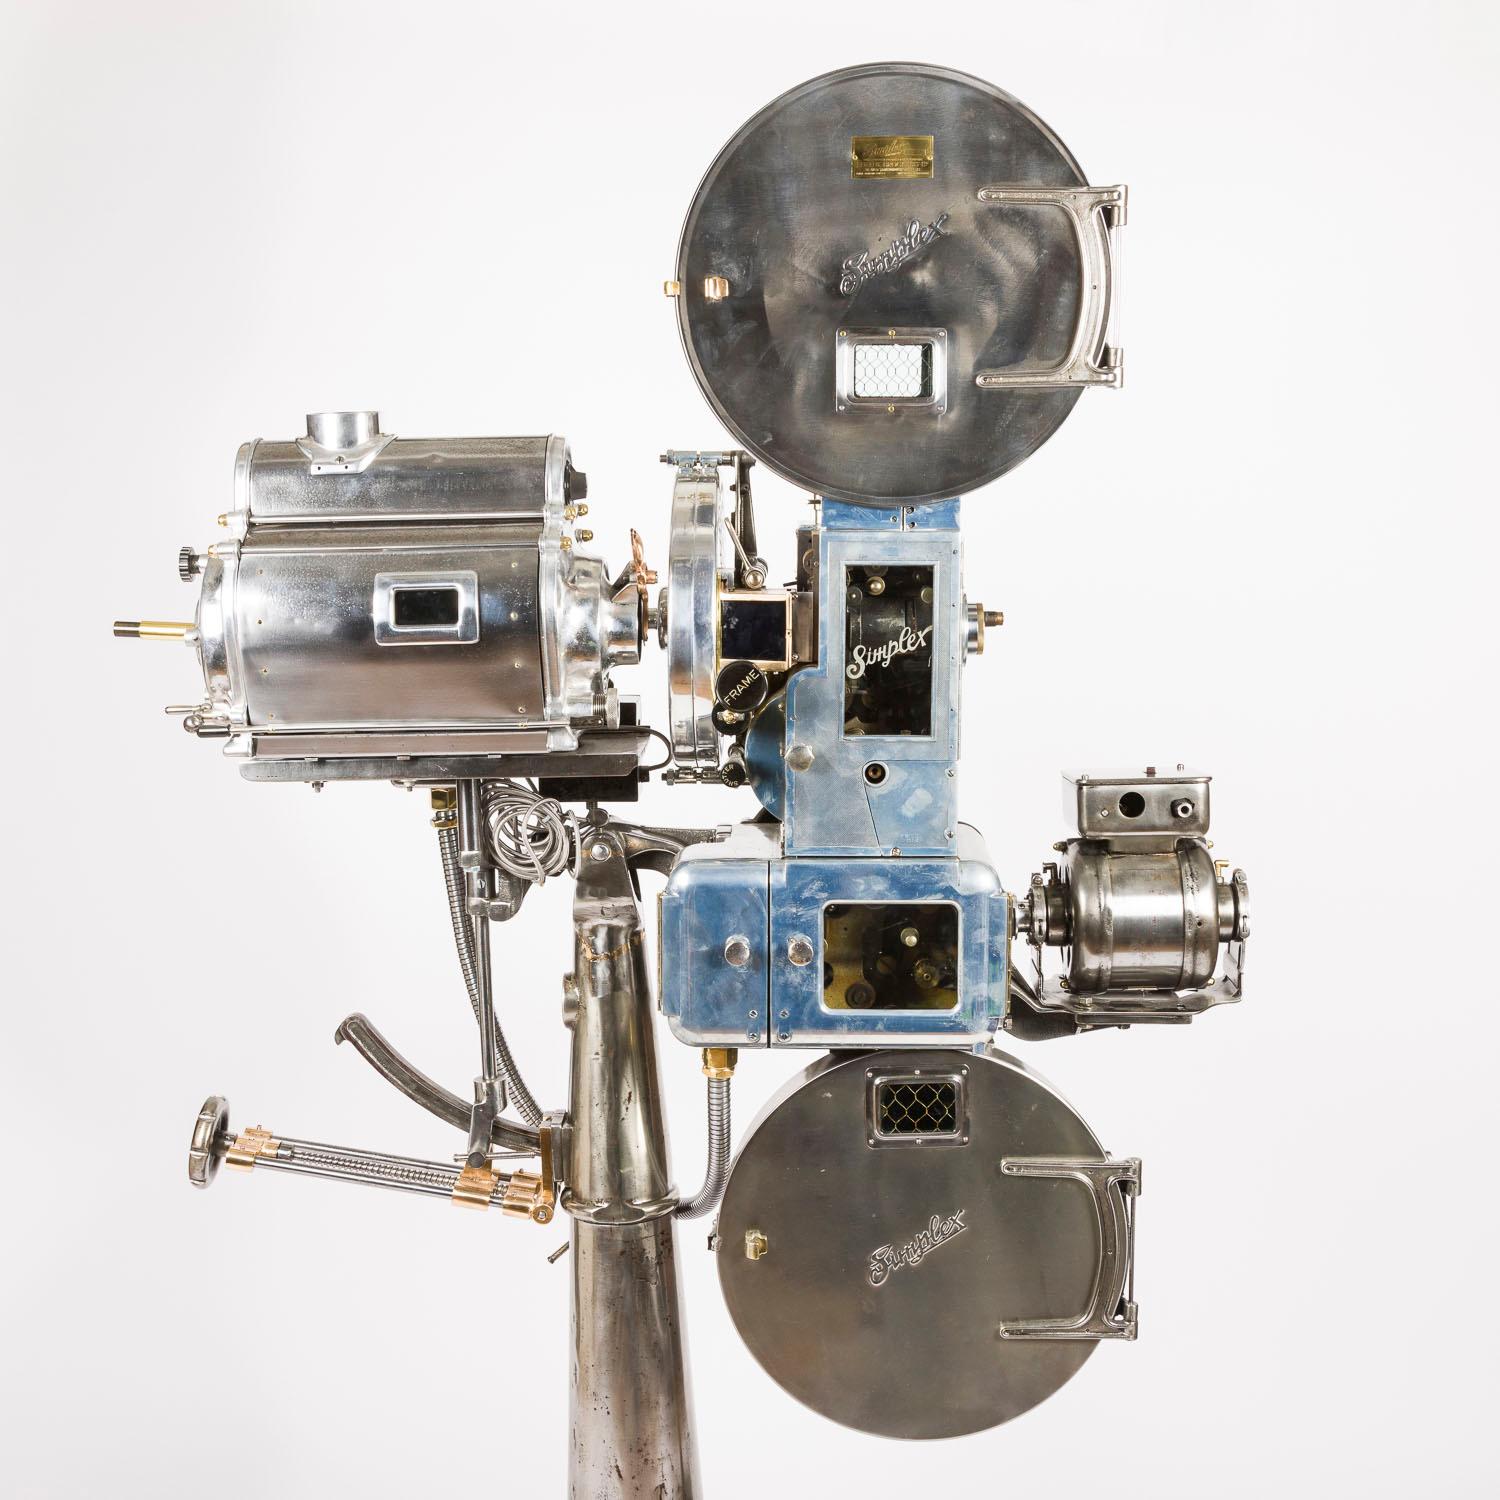 A 35 mm Simplex cinema projector by International Projector Corp of New York. Circa 1935.

Fitted with a Strong portable reflector arc lamp light box by The Strong Electric Corp of Toledo, Ohio. Now fitted with an E27 electric light.

With a